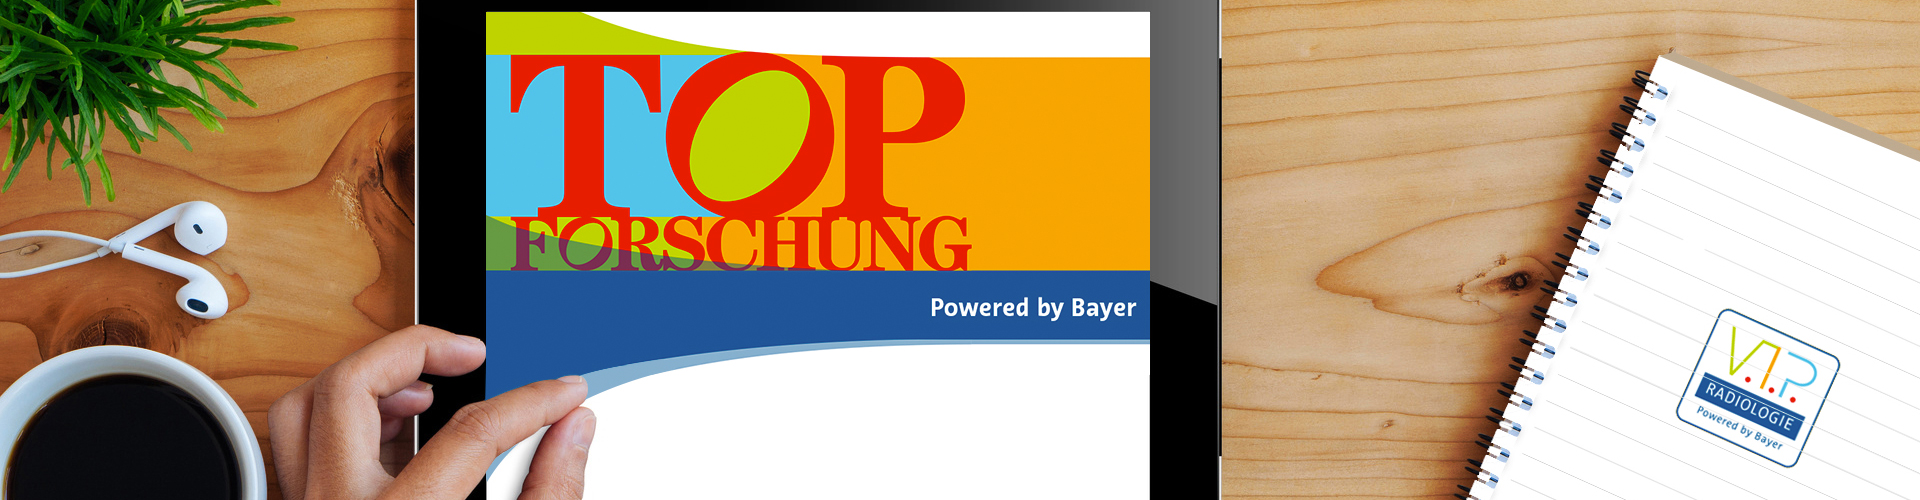 Forschung – Powered by Bayer